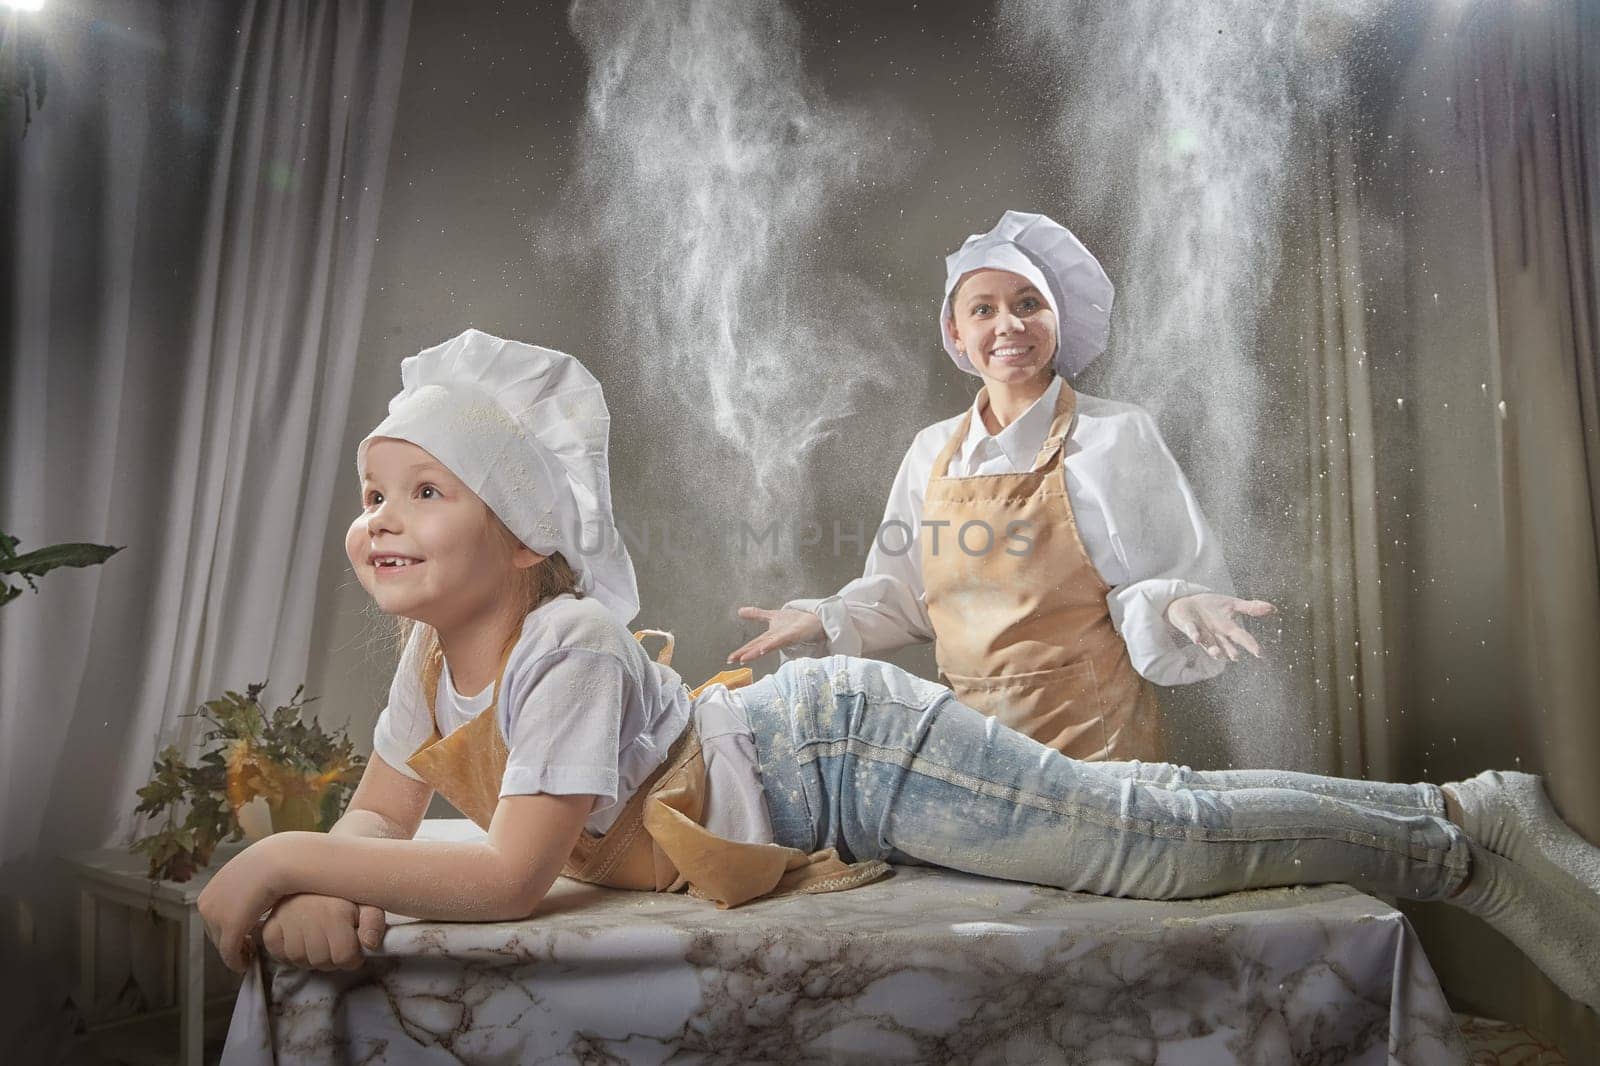 Cute oriental family with mother, daughter cooking in the kitchen on Ramadan, Kurban-Bairam. Funny family at cook photo shoot with flour. Easter by keleny